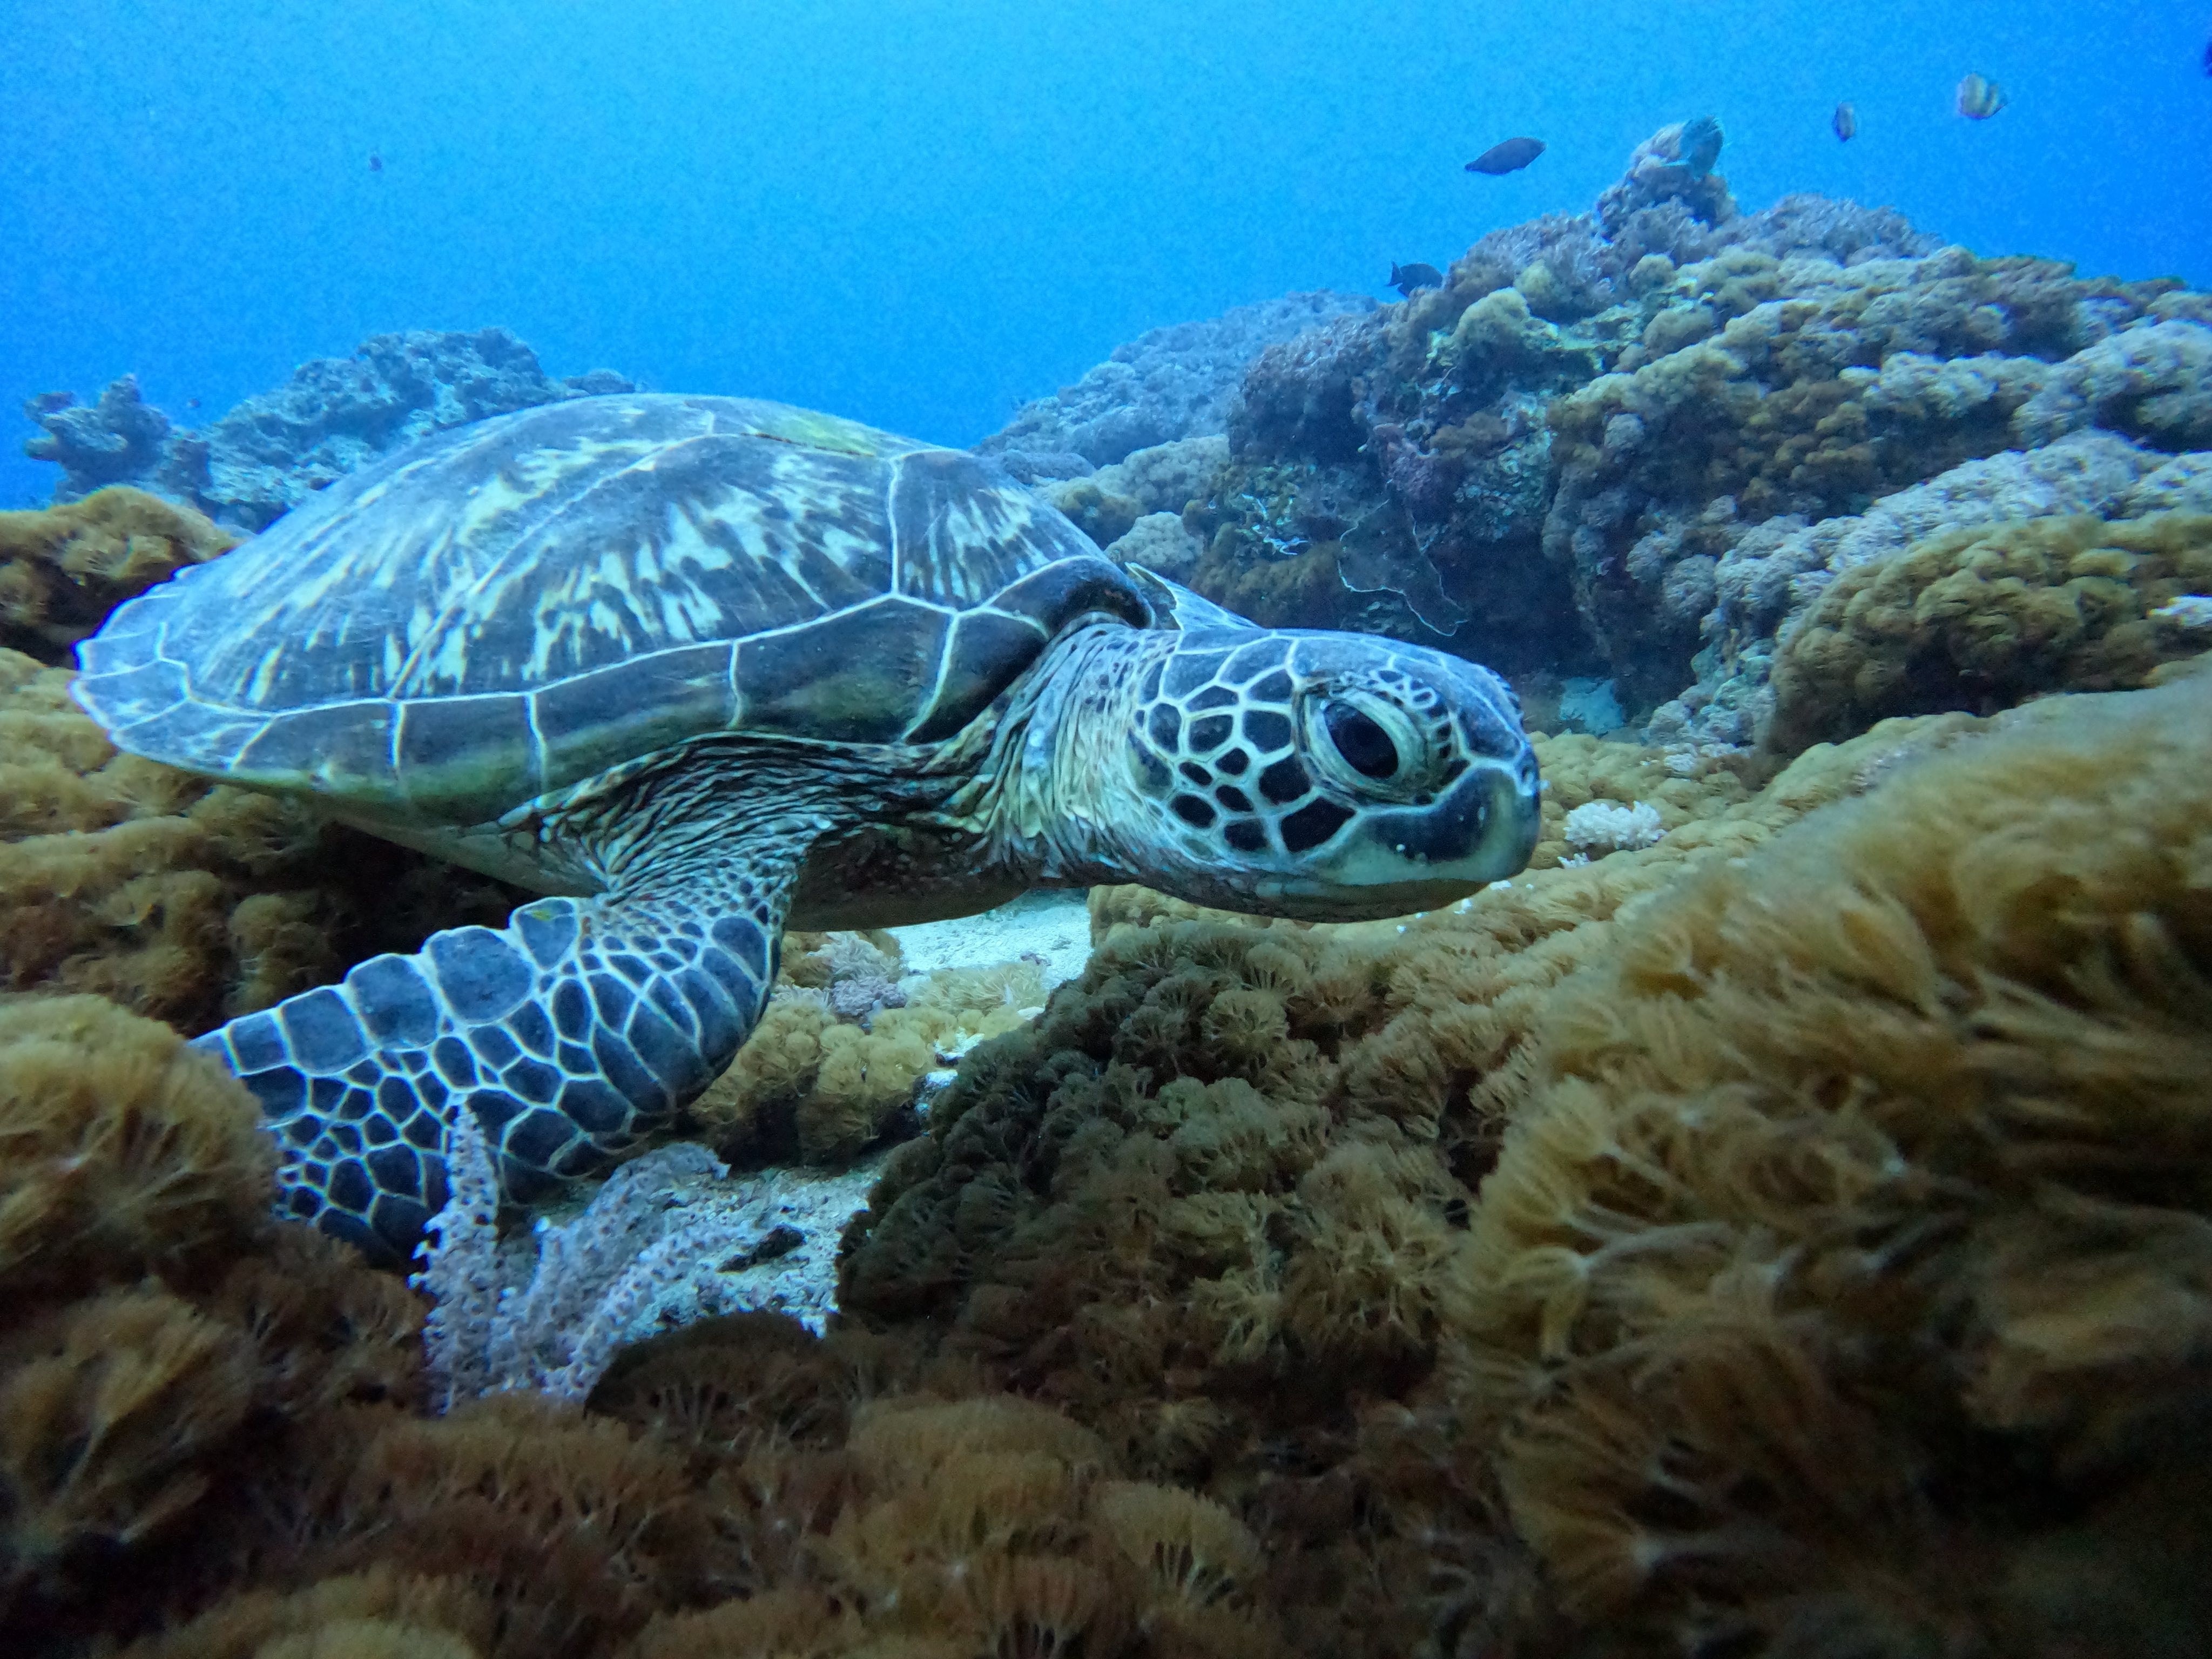 A well-intentioned multi-year effort to save a threatened population of green sea turtles off the coast of Taiwan had the unintended consequence of crashing the populations of nearby lizards. Photo: Shutterstock